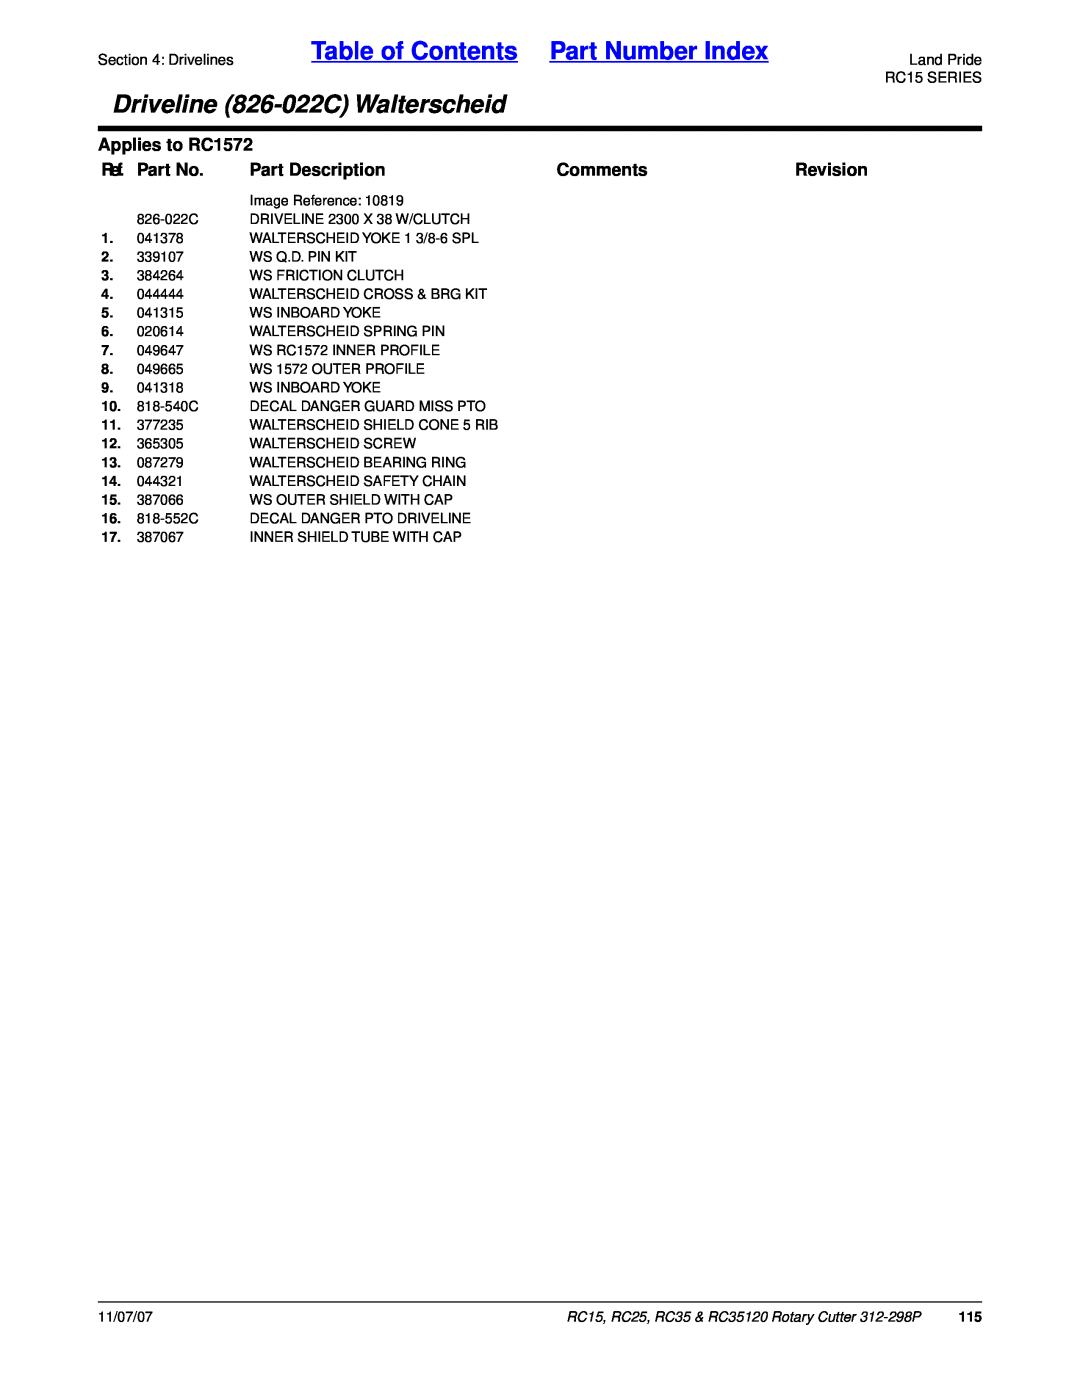 Land Pride RC35 Table of Contents Part Number Index, Driveline 826-022CWalterscheid, Applies to RC1572, Ref. Part No 